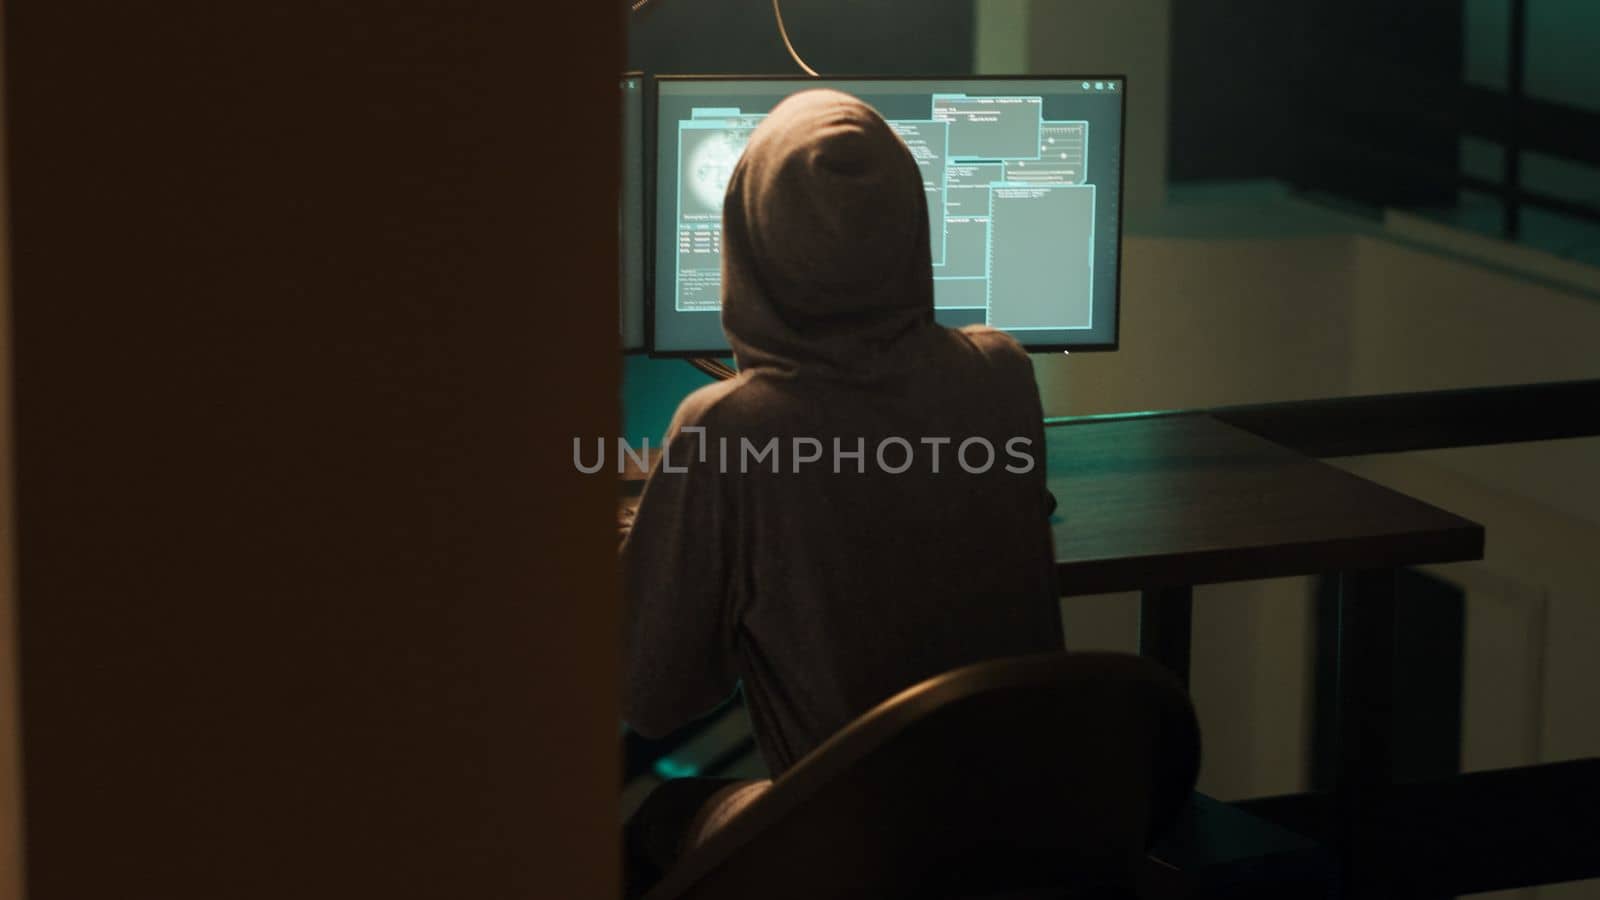 Female spy breaking into computer firewall to hack system, feeling happy about cybercrime success. Woman using malware or trojan virus, doing phishing espionage for hacktivism. Handheld shot.